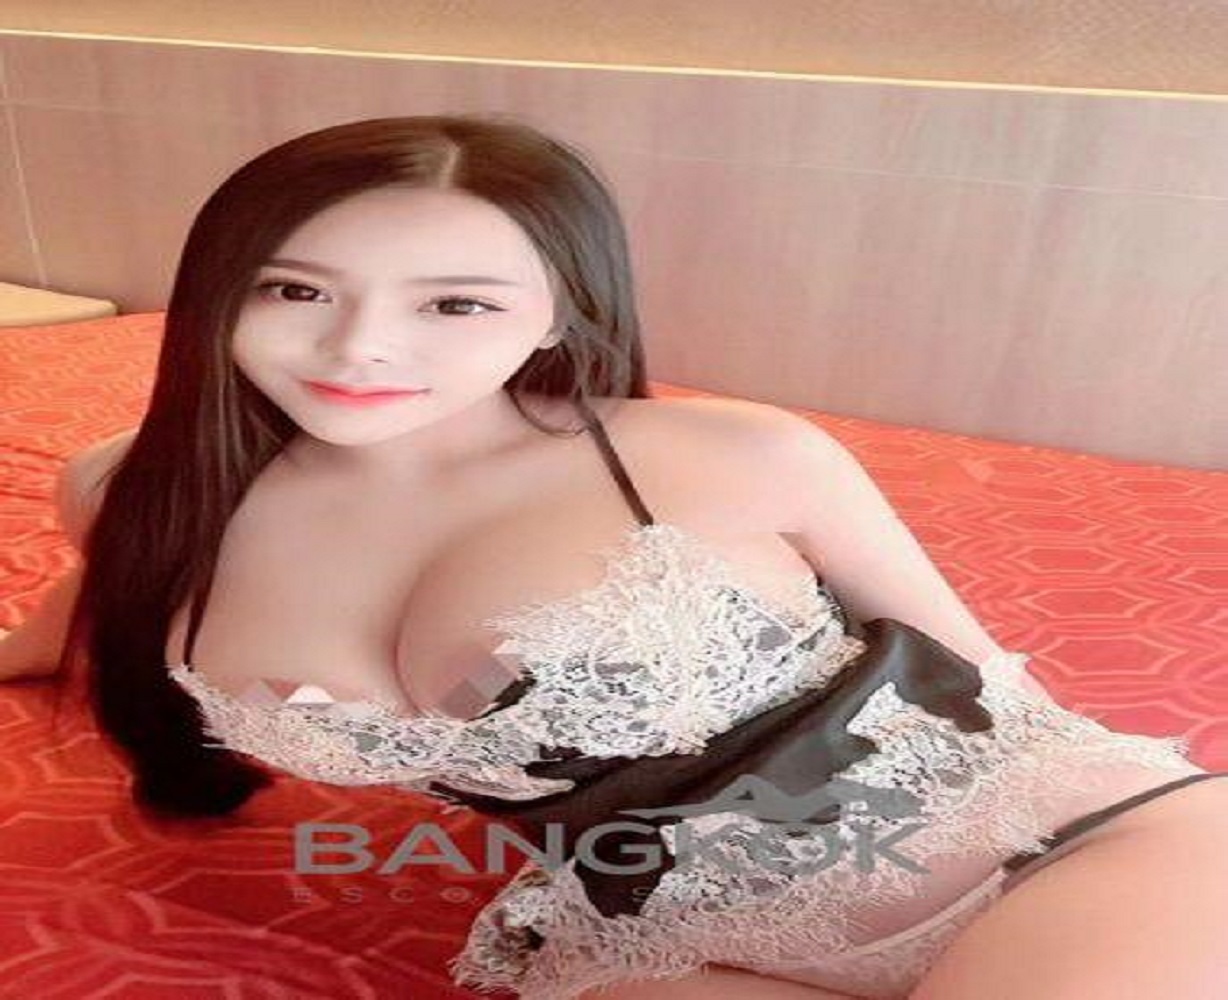 Preparing for Your Out Call Date with a Thai Escort